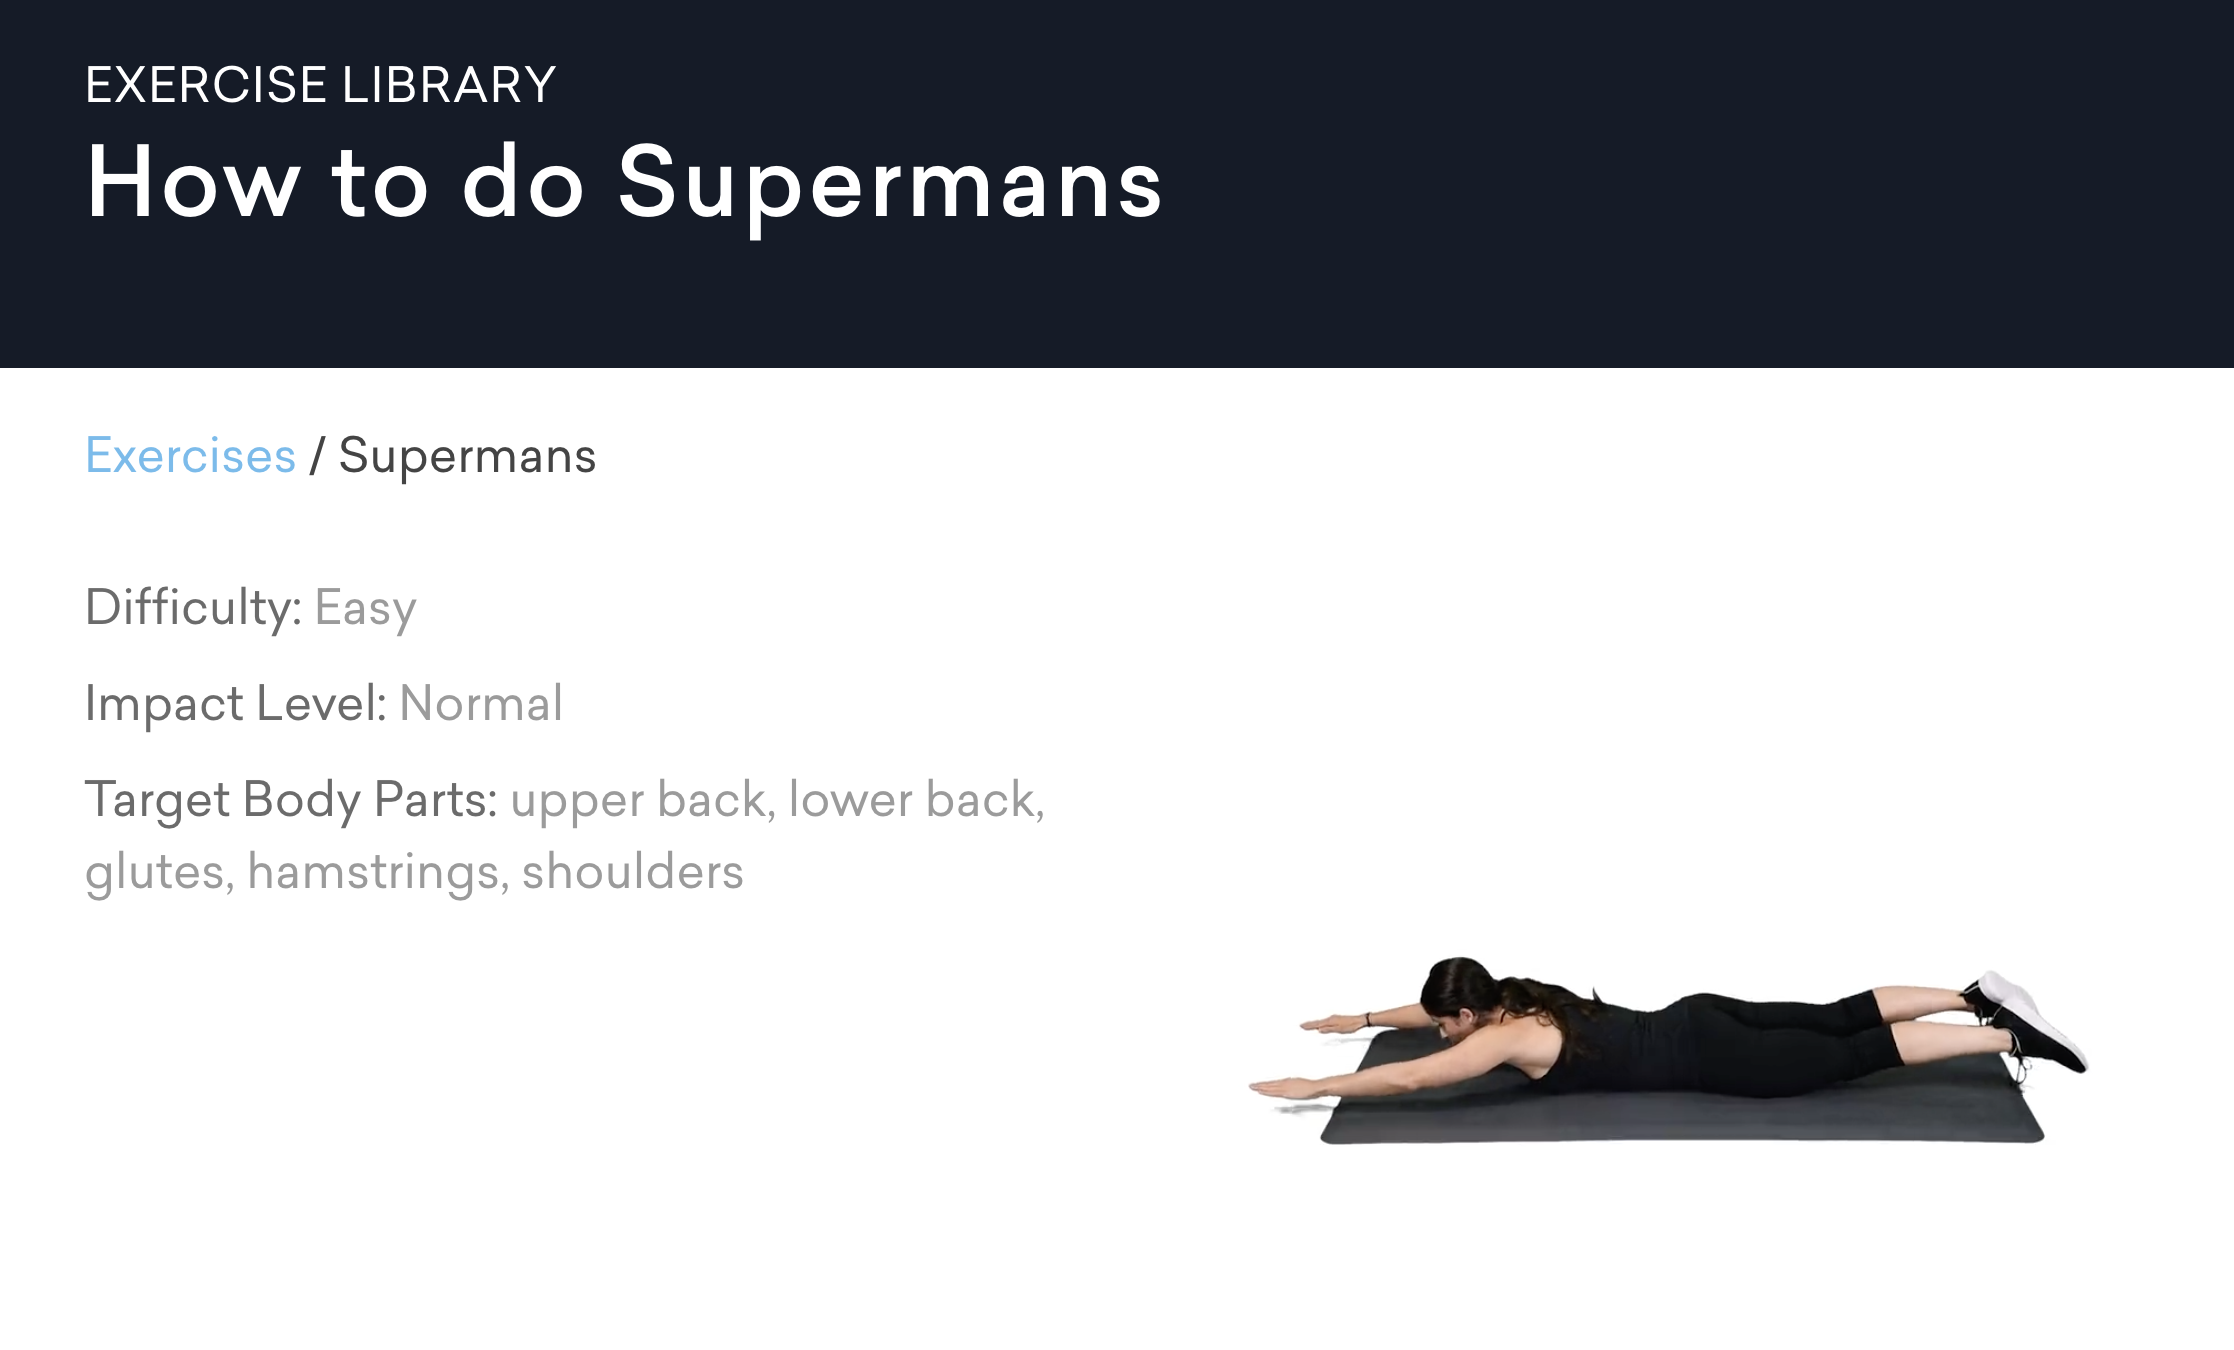 how to Supermans